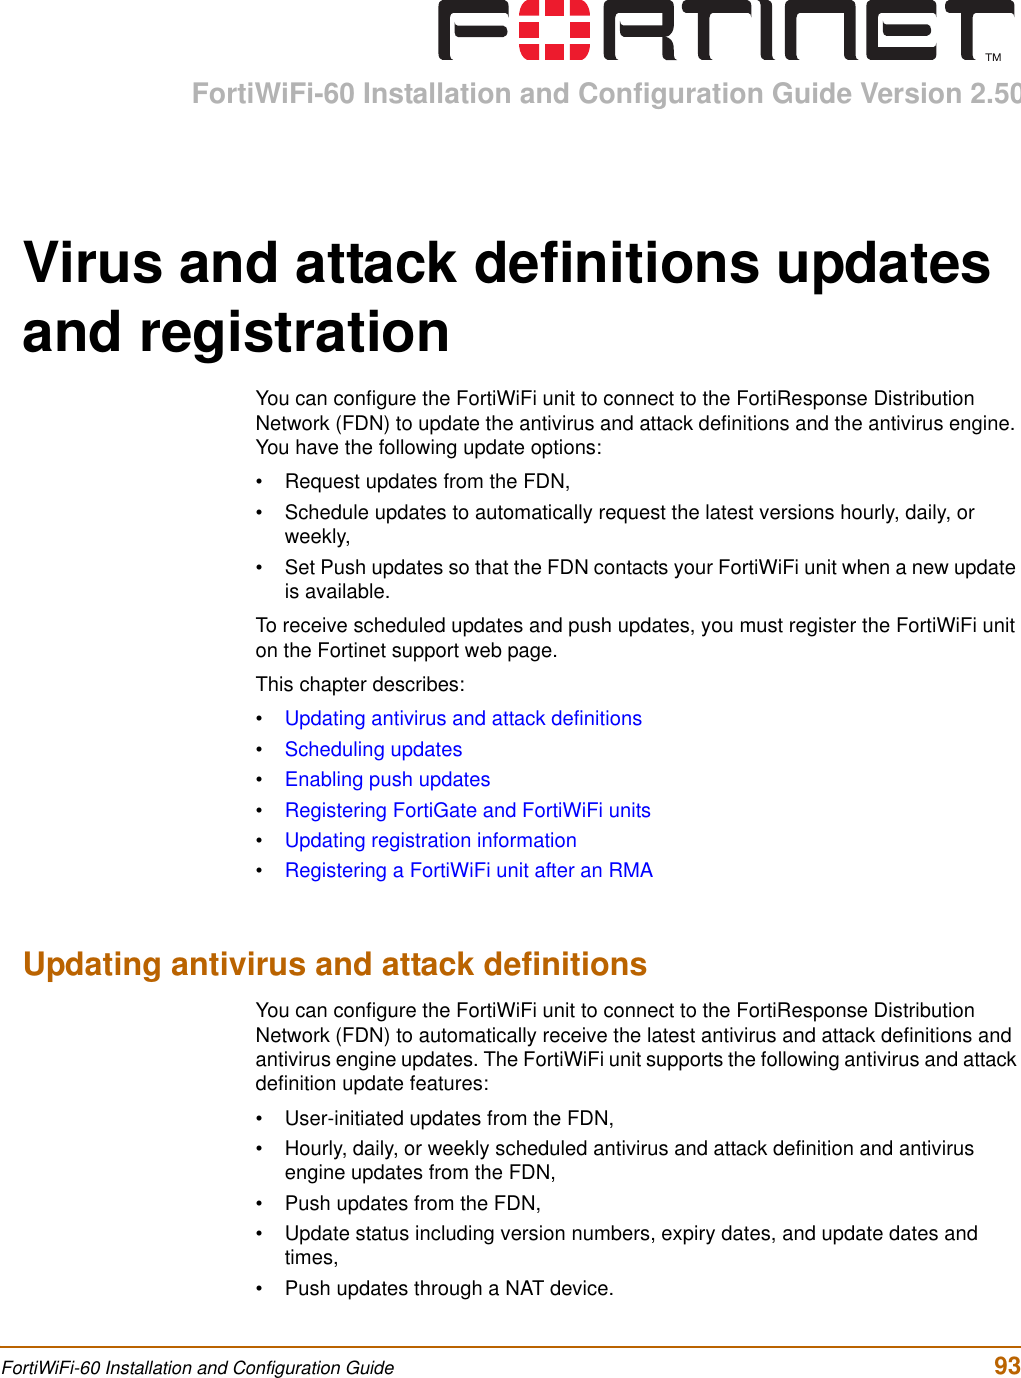 FortiWiFi-60 Installation and Configuration Guide Version 2.50FortiWiFi-60 Installation and Configuration Guide  93Virus and attack definitions updates and registrationYou can configure the FortiWiFi unit to connect to the FortiResponse Distribution Network (FDN) to update the antivirus and attack definitions and the antivirus engine. You have the following update options:• Request updates from the FDN, • Schedule updates to automatically request the latest versions hourly, daily, or weekly,• Set Push updates so that the FDN contacts your FortiWiFi unit when a new update is available.To receive scheduled updates and push updates, you must register the FortiWiFi unit on the Fortinet support web page.This chapter describes:•Updating antivirus and attack definitions•Scheduling updates•Enabling push updates•Registering FortiGate and FortiWiFi units•Updating registration information•Registering a FortiWiFi unit after an RMAUpdating antivirus and attack definitionsYou can configure the FortiWiFi unit to connect to the FortiResponse Distribution Network (FDN) to automatically receive the latest antivirus and attack definitions and antivirus engine updates. The FortiWiFi unit supports the following antivirus and attack definition update features:• User-initiated updates from the FDN,• Hourly, daily, or weekly scheduled antivirus and attack definition and antivirus engine updates from the FDN,• Push updates from the FDN,• Update status including version numbers, expiry dates, and update dates and times,• Push updates through a NAT device.